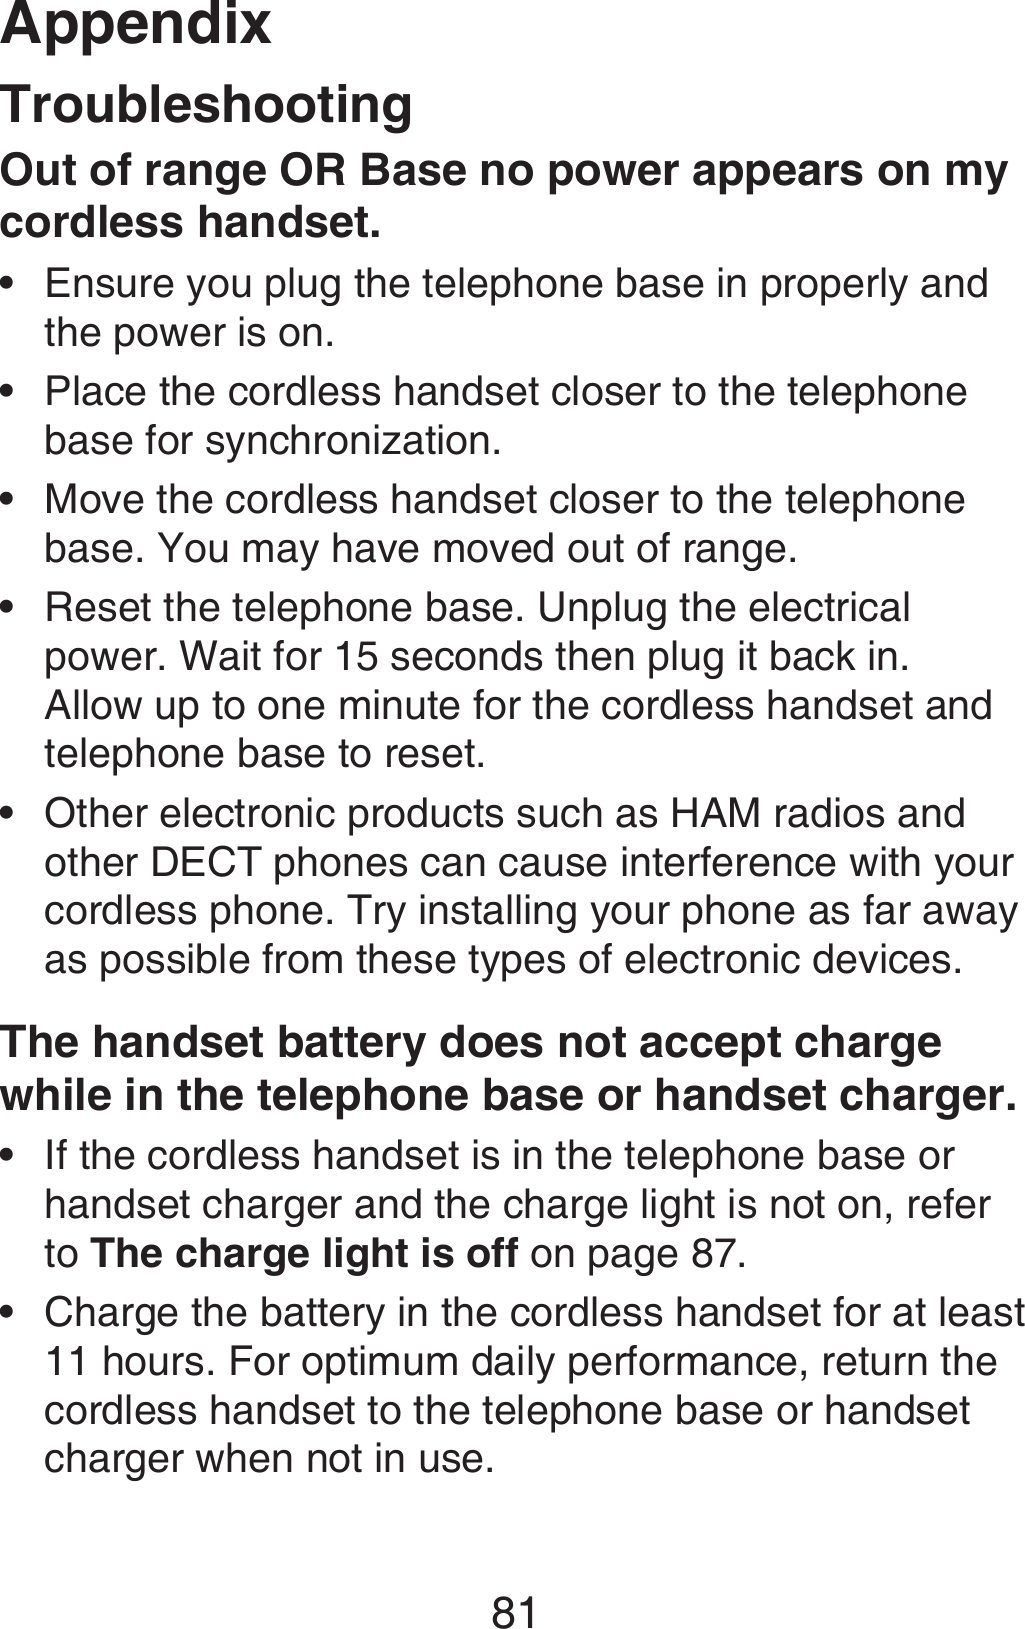 Appendix81TroubleshootingOut of range OR Base no power appears on my cordless handset.Ensure you plug the telephone base in properly and the power is on.Place the cordless handset closer to the telephone base for synchronization.Move the cordless handset closer to the telephone base. You may have moved out of range.Reset the telephone base. Unplug the electrical power. Wait for 15 seconds then plug it back in. Allow up to one minute for the cordless handset and telephone base to reset.Other electronic products such as HAM radios and other DECT phones can cause interference with your cordless phone. Try installing your phone as far away as possible from these types of electronic devices. The handset battery does not accept charge while in the telephone base or handset charger.If the cordless handset is in the telephone base or handset charger and the charge light is not on, refer to The charge light is off on page 87.Charge the battery in the cordless handset for at least 11 hours. For optimum daily performance, return the cordless handset to the telephone base or handset charger when not in use.•••••••